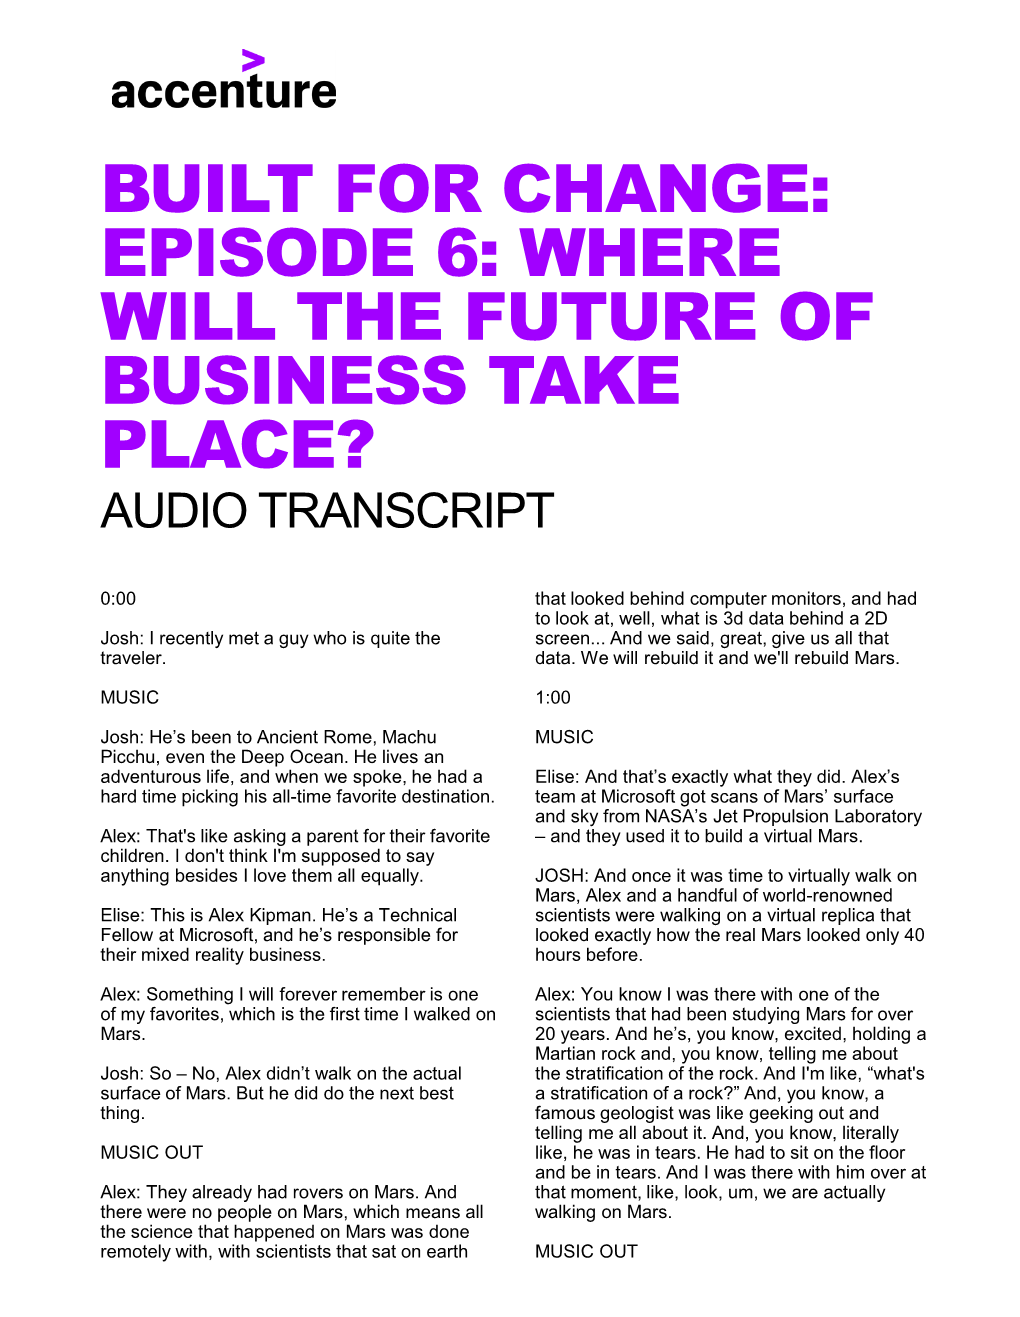 Episode 6: Where Will the Future of Business Take Place? Audio Transcript